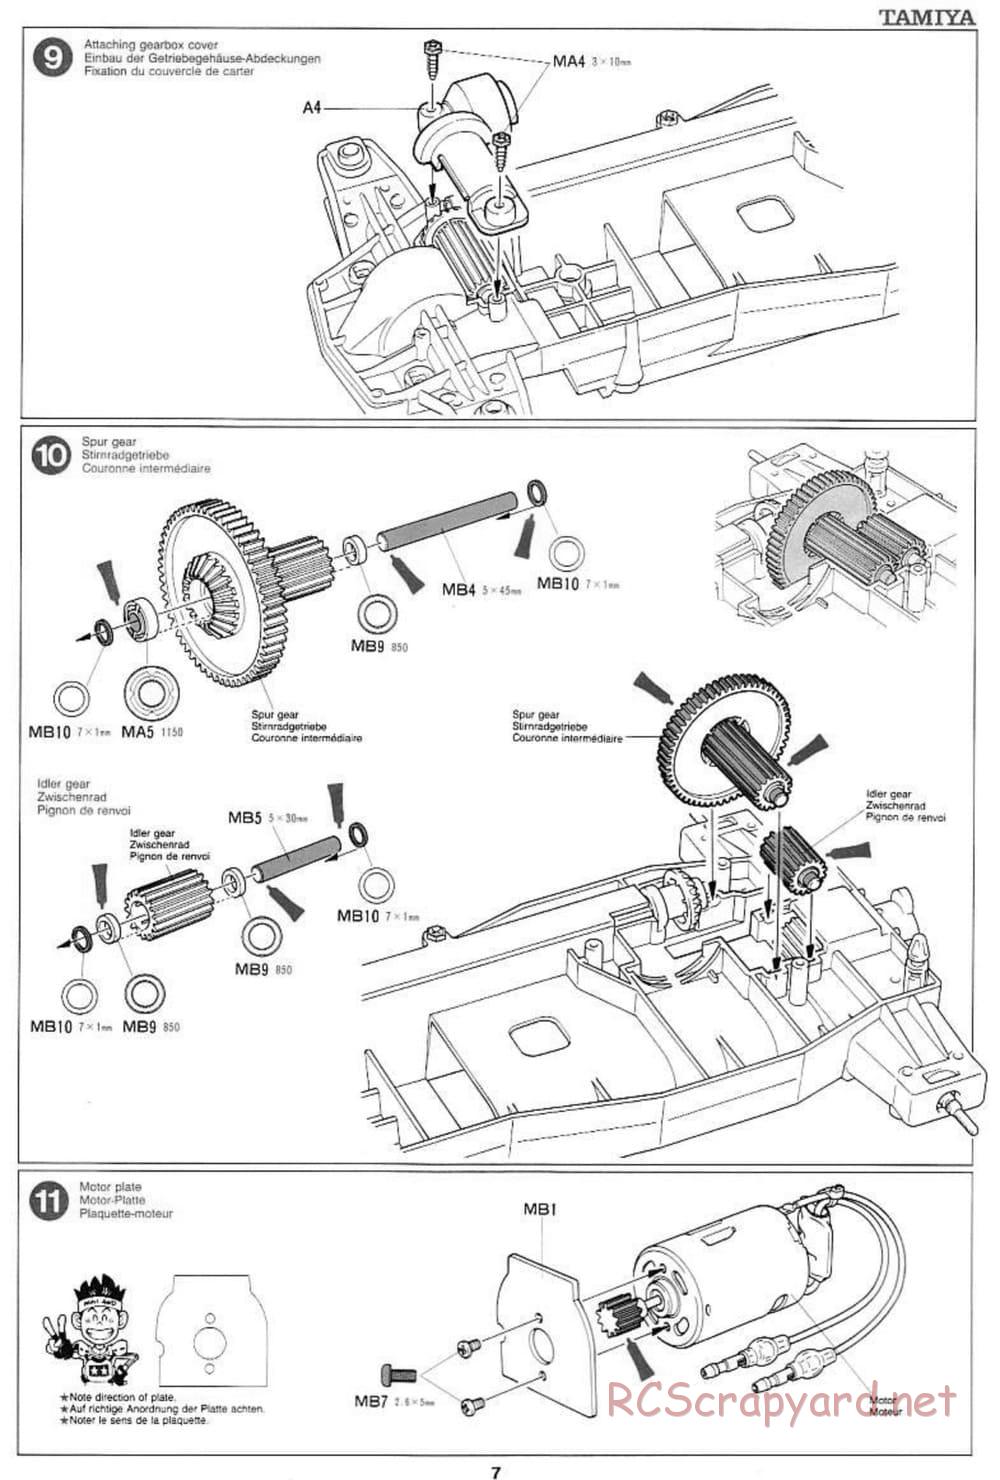 Tamiya - Voltec Fighter - Boy's 4WD Chassis - Manual - Page 7